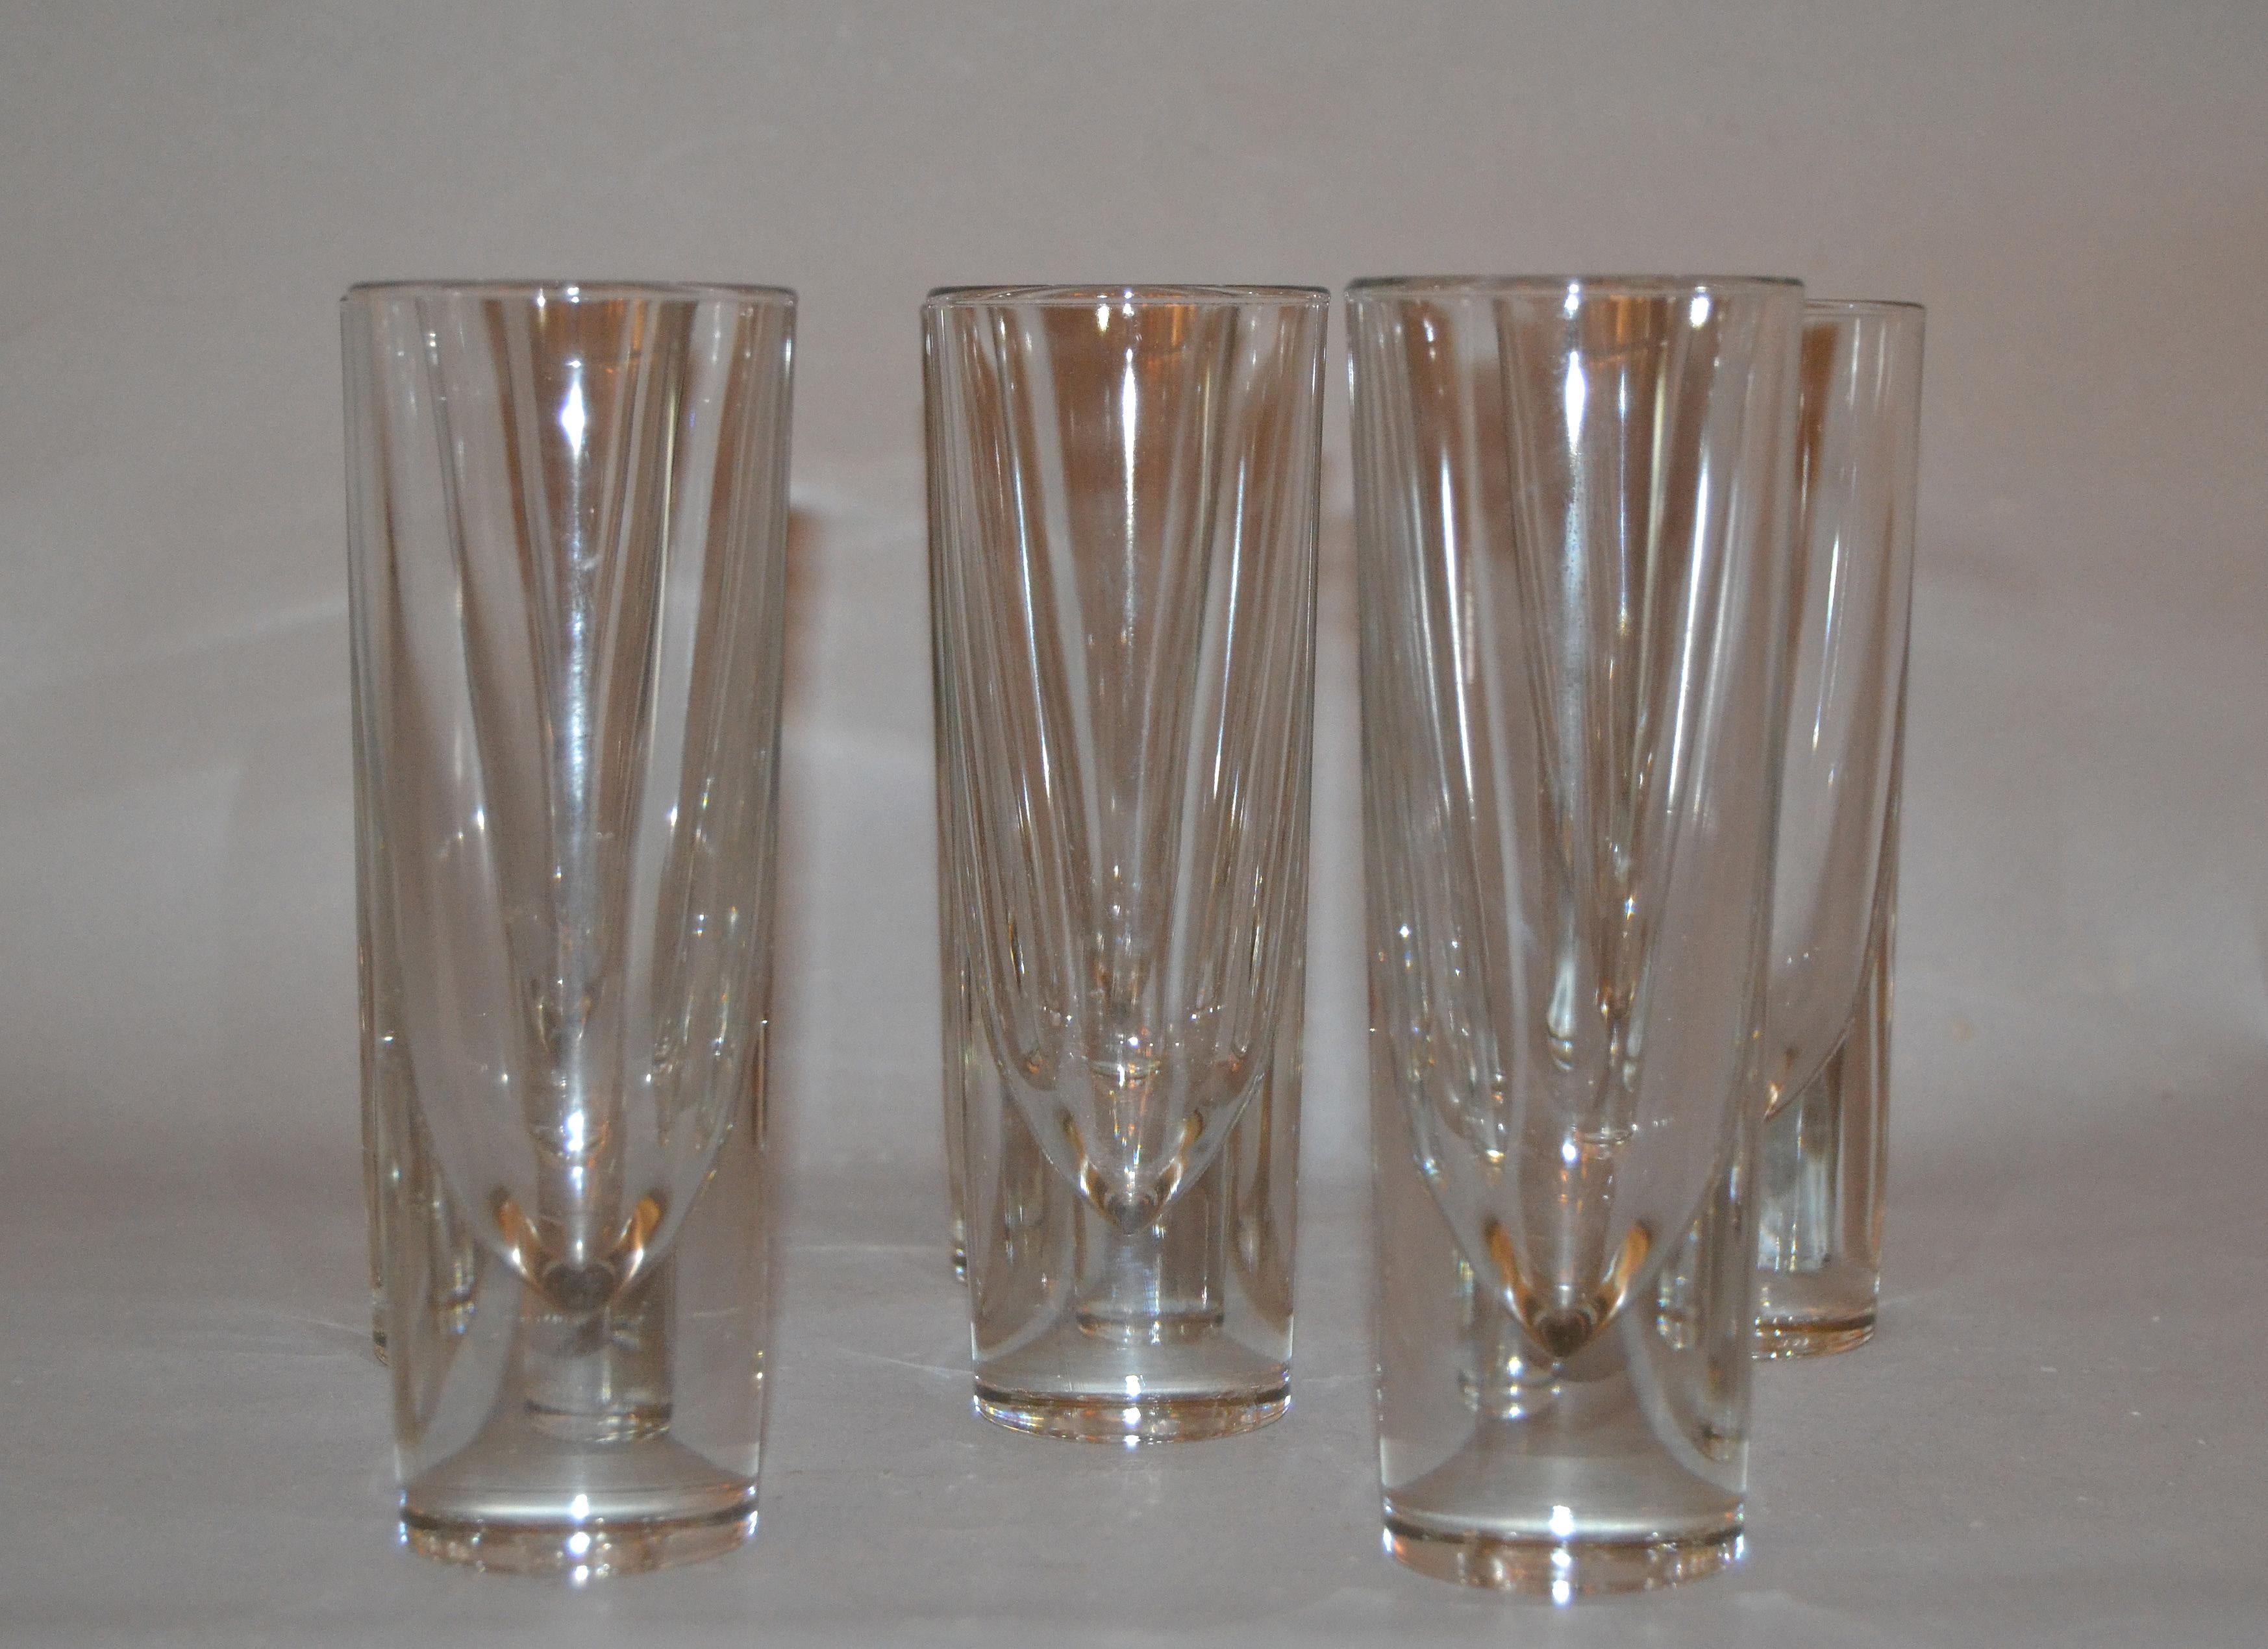 Set of 8 Carlo Moretti modern heavy blown glass drinking glasses, glassware made in Italy.
Each glass is marked underneath with Italy.
   